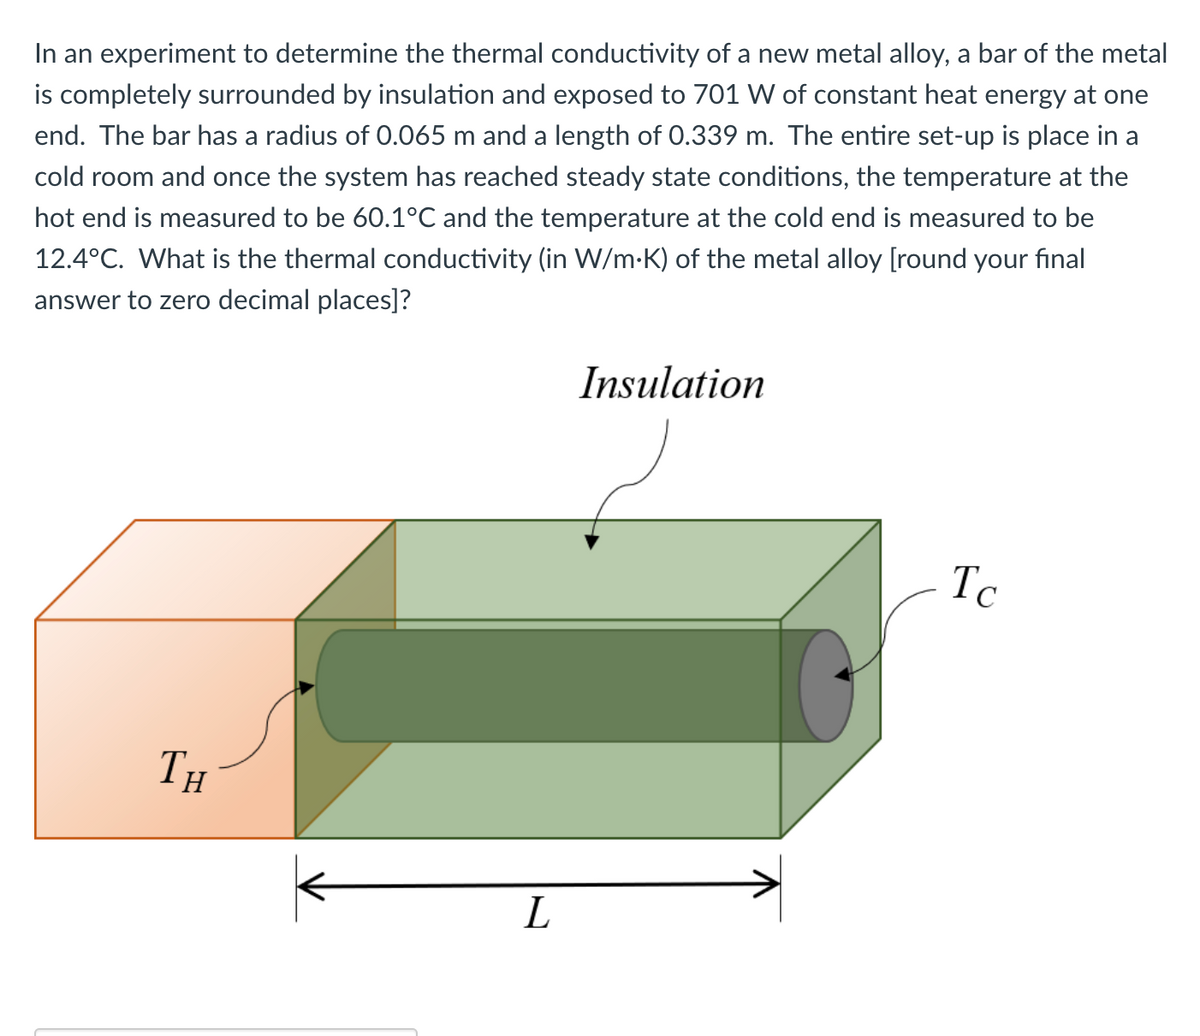 In an experiment to determine the thermal conductivity of a new metal alloy, a bar of the metal
is completely surrounded by insulation and exposed to 701 W of constant heat energy at one
end. The bar has a radius of 0.065 m and a length of 0.339 m. The entire set-up is place in a
cold room and once the system has reached steady state conditions, the temperature at the
hot end is measured to be 60.1°C and the temperature at the cold end is measured to be
12.4°C. What is the thermal conductivity (in W/m.K) of the metal alloy [round your final
answer to zero decimal places]?
TH
L
Insulation
Tc